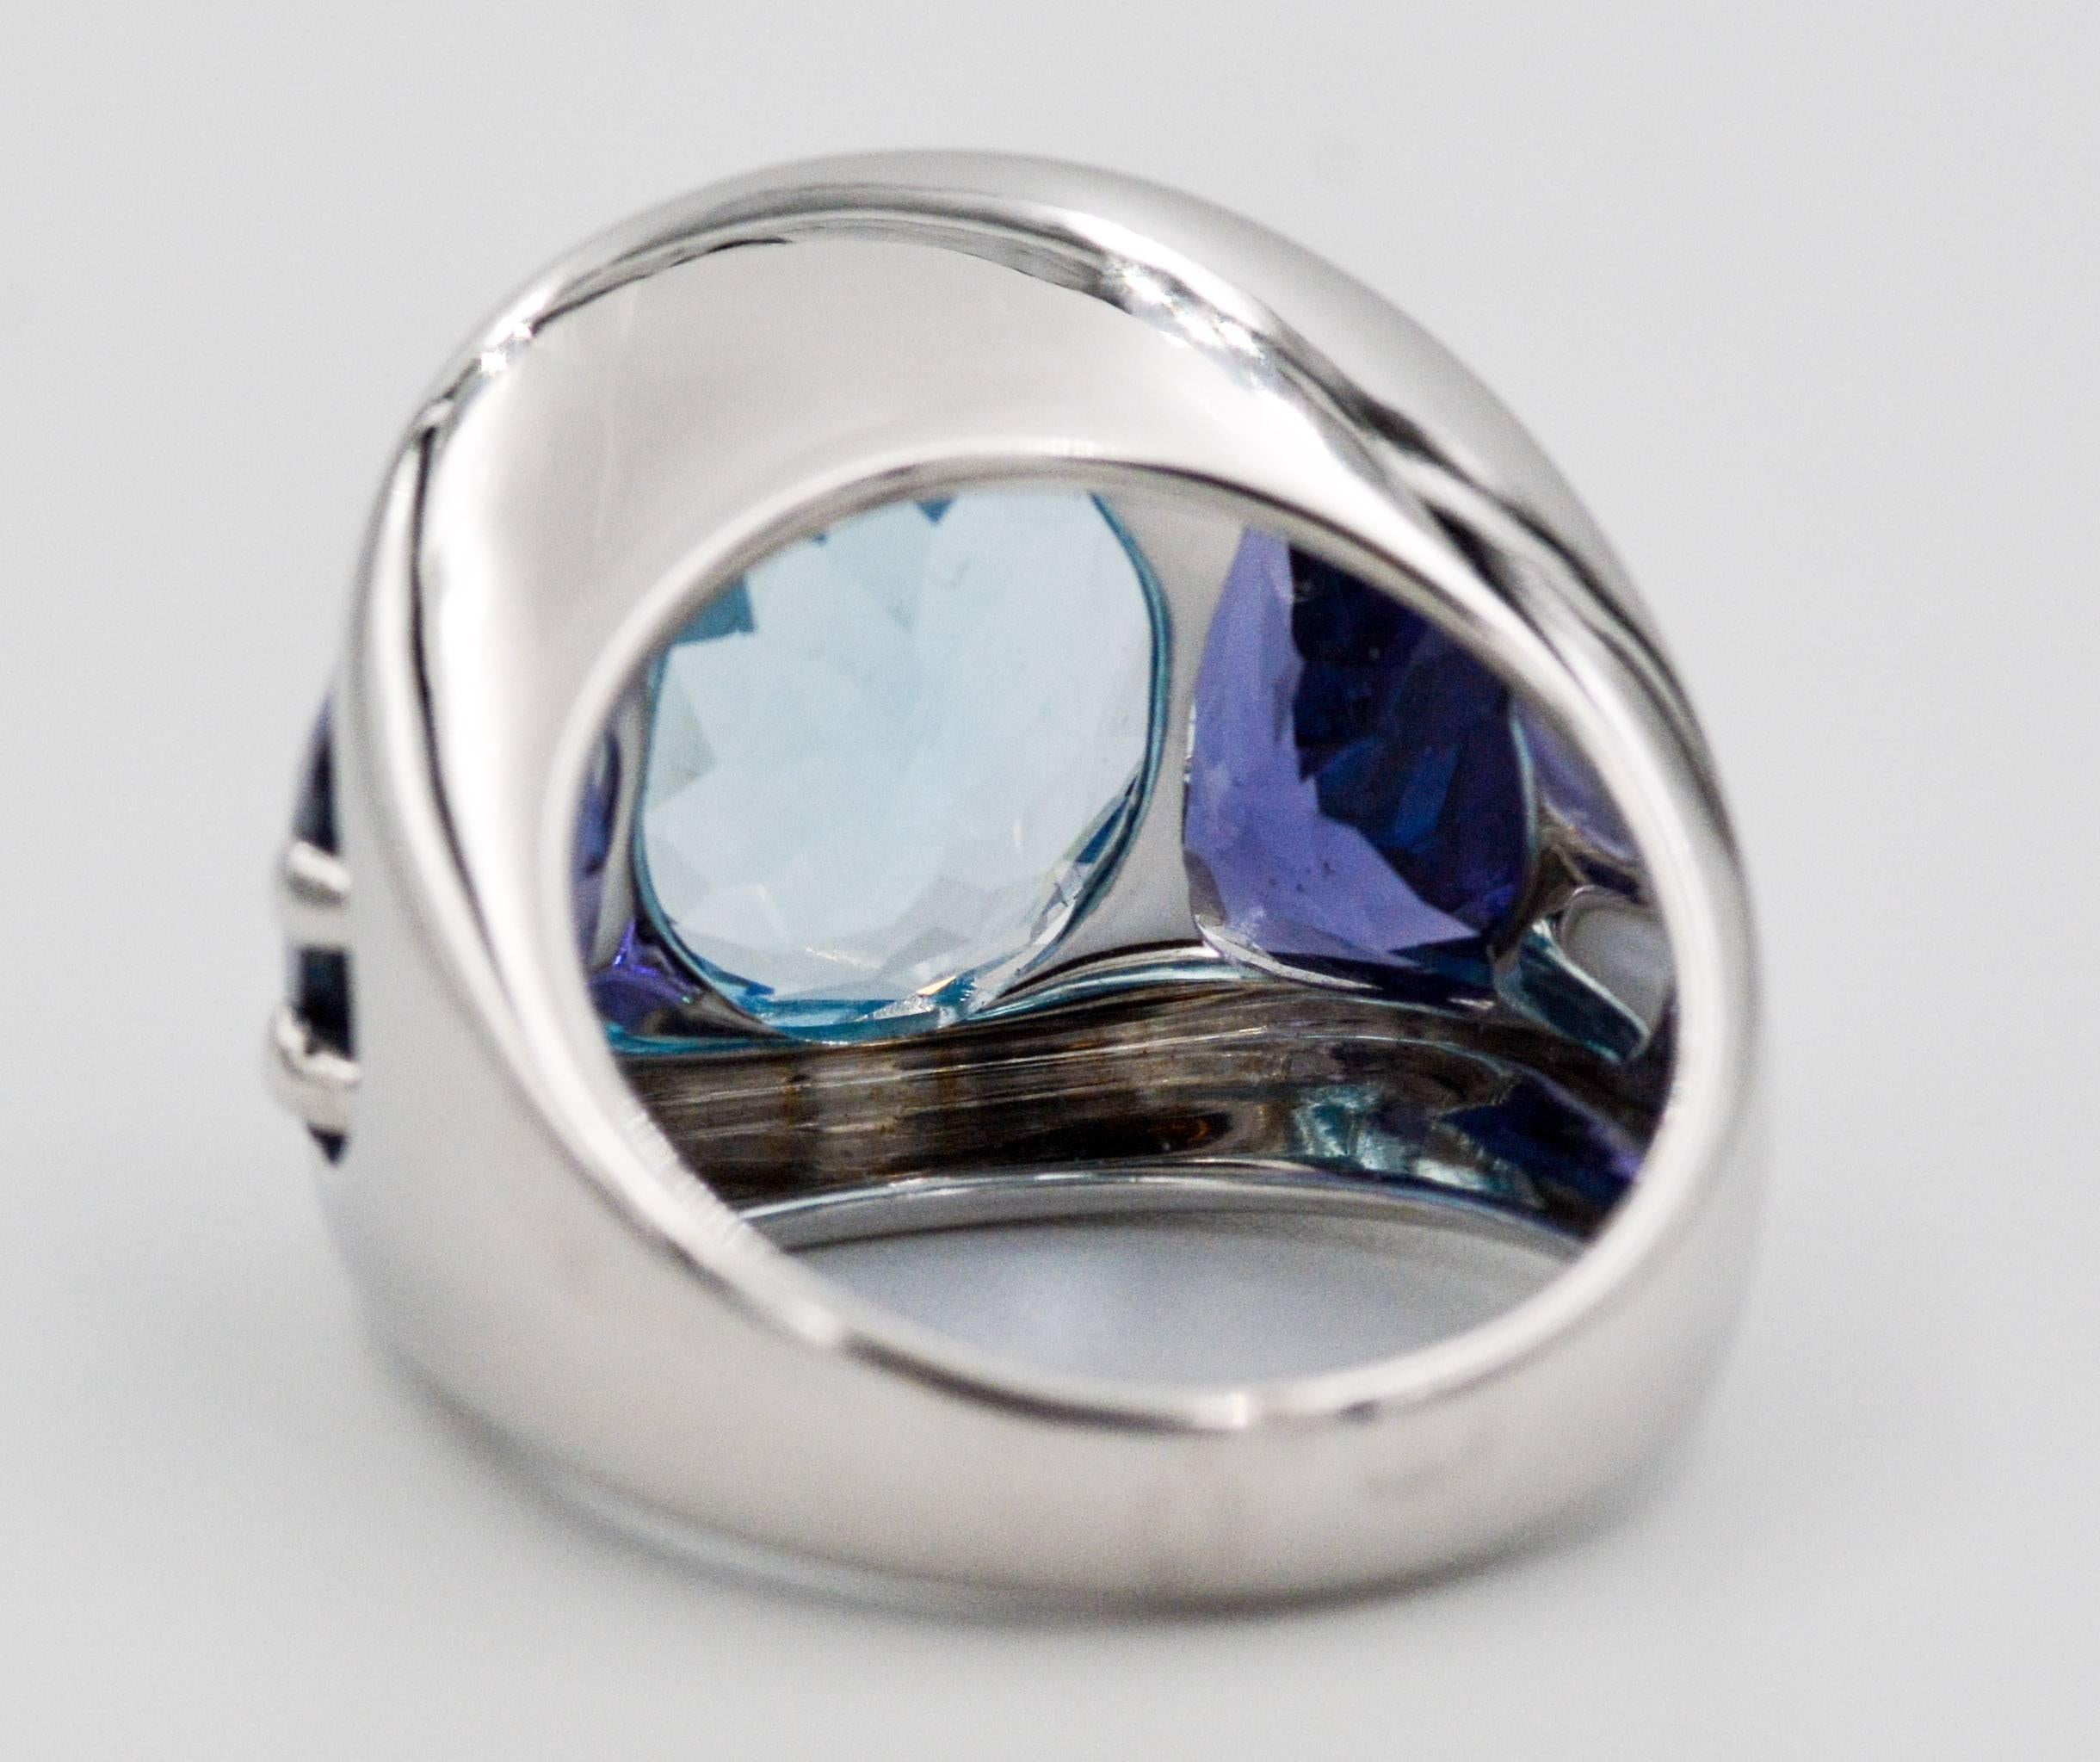 Seaman Schepps centered this amazing ring with an amazing oval faceted blue topaz that measures 15.22X12.00 mm.  Accenting and contrasting the rich blue of the oval topaz Seaman Schepps set two rich purple trapezoid cut iolite stones which measure